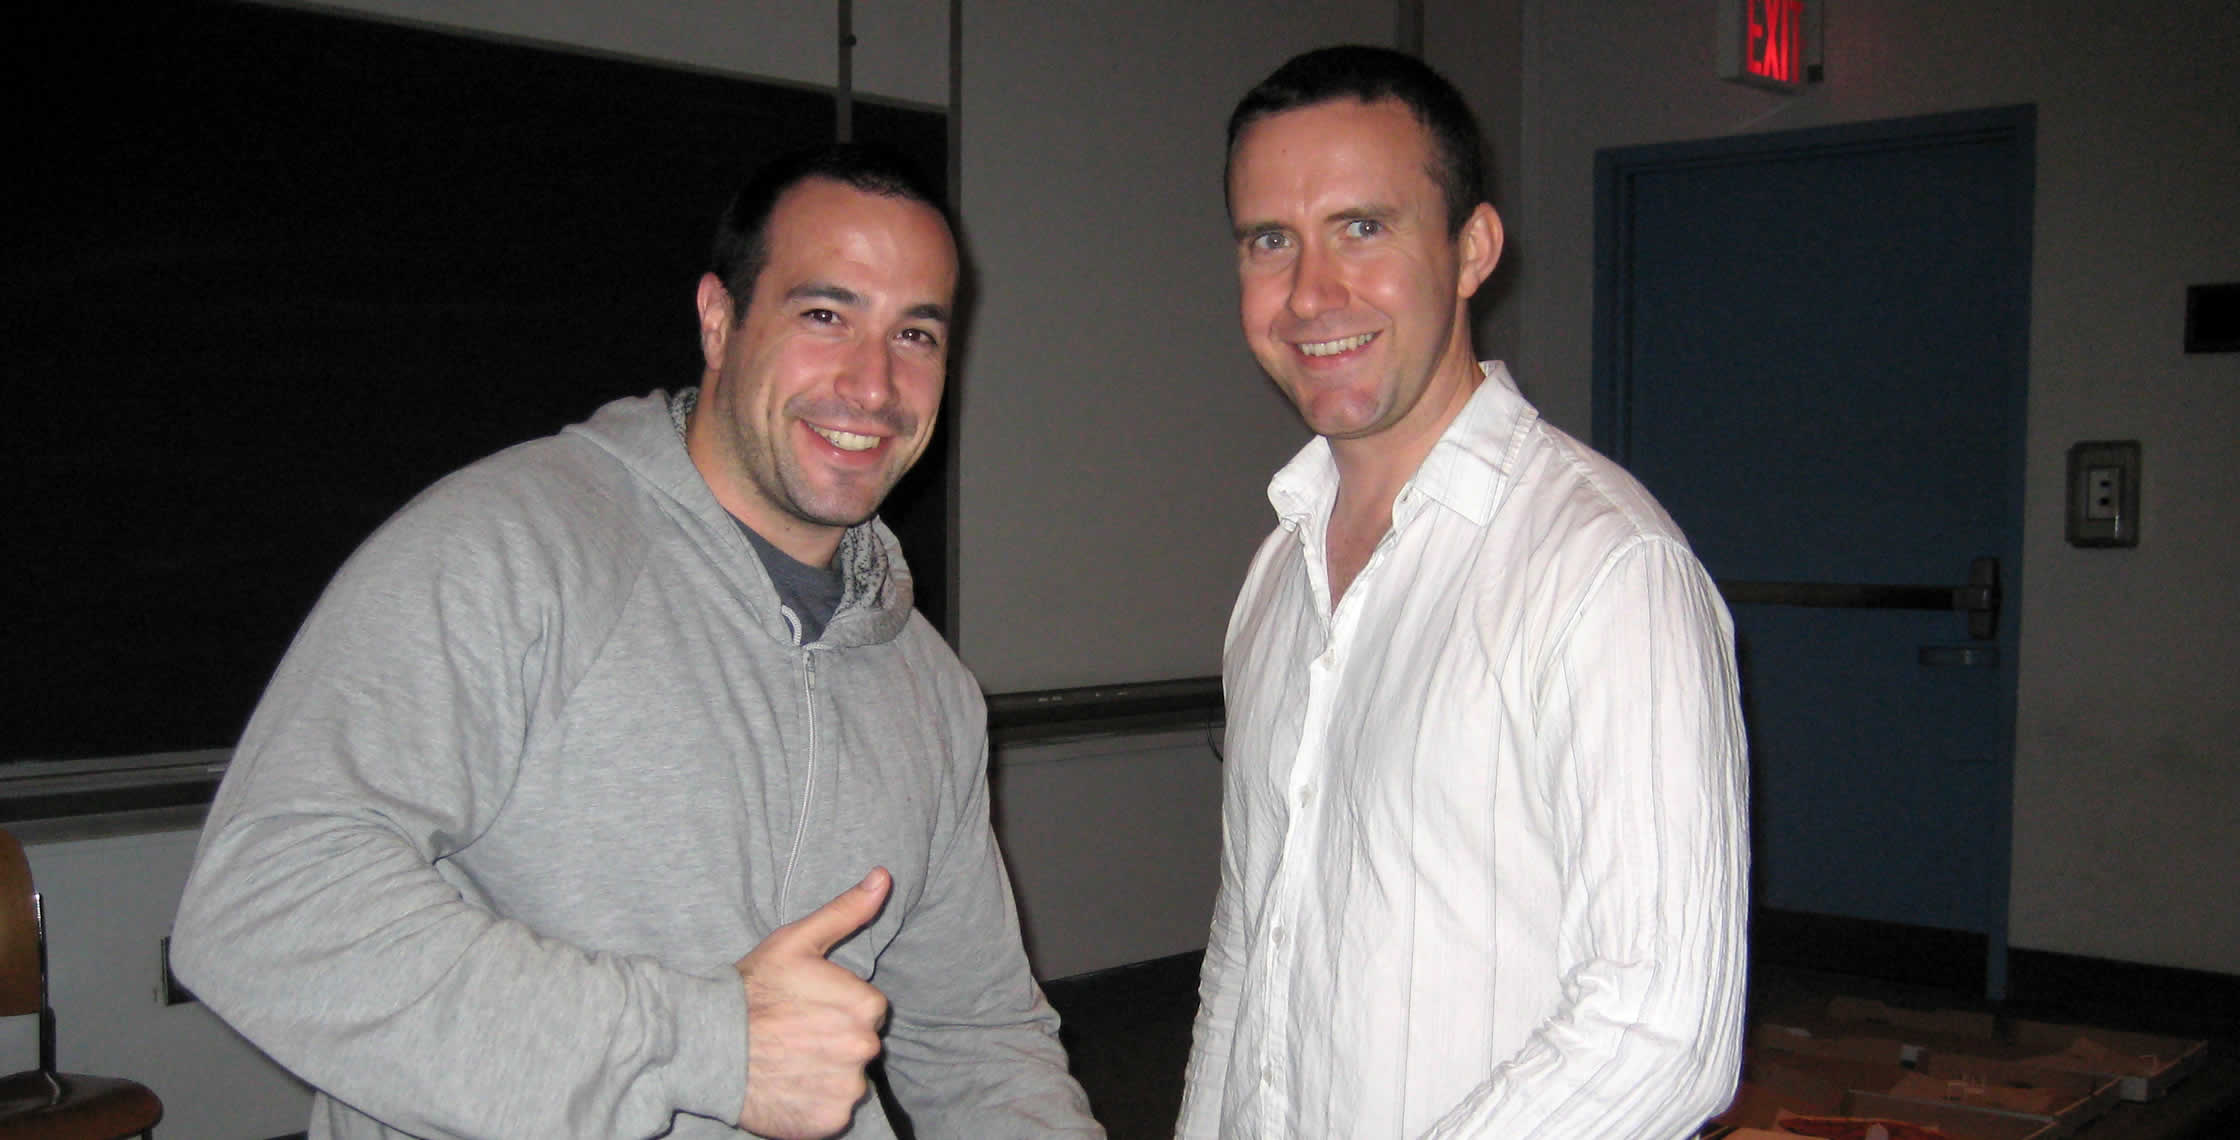 Ben Nadel at the New York ColdFusion User Group (Sep. 2008) with: Peter Bell